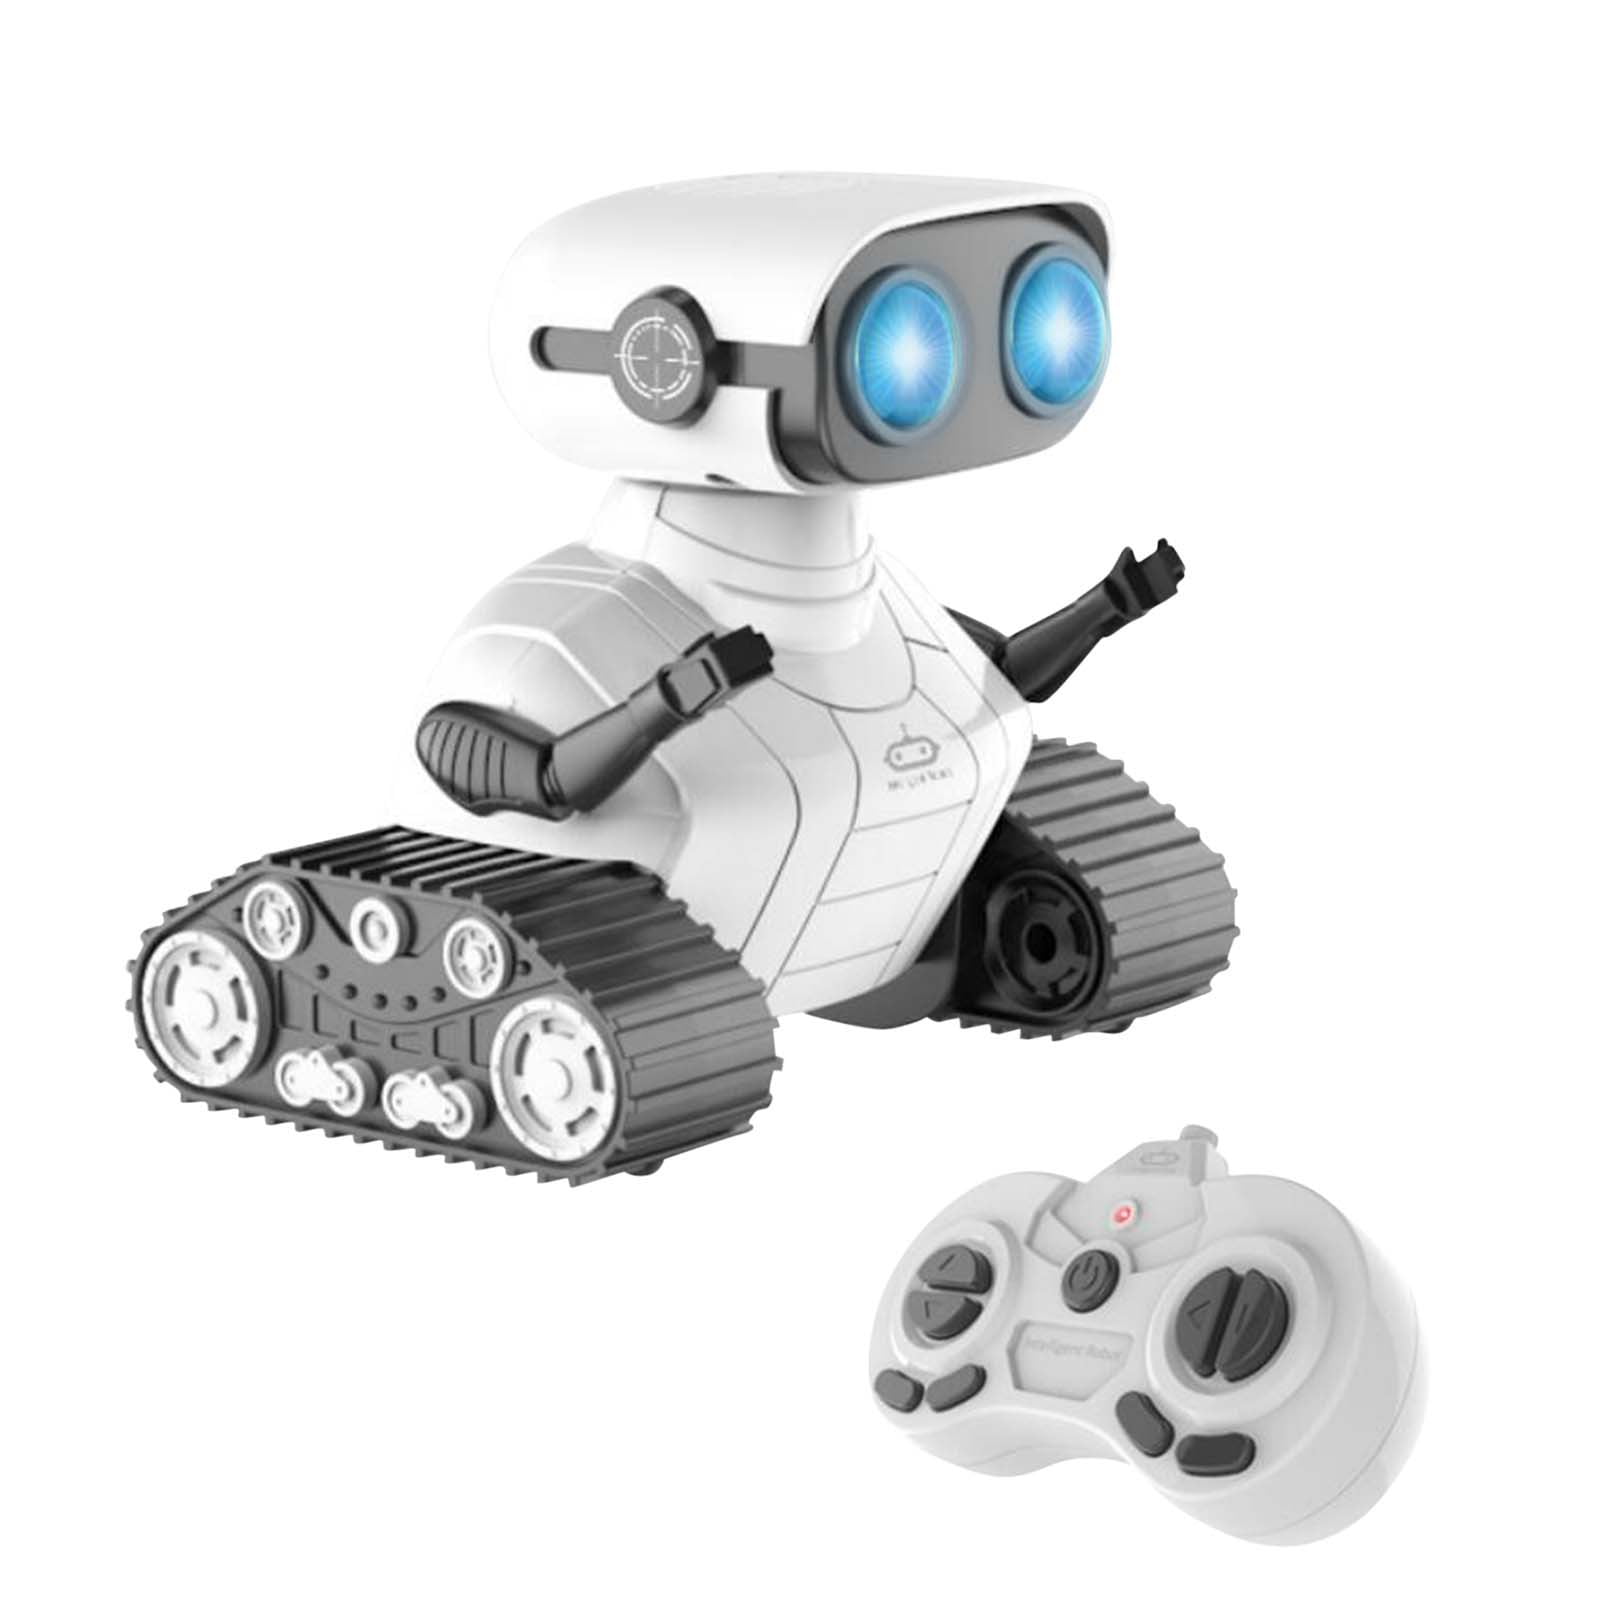 Toys for 1 year old boy Christmas Present-Remote Control Robot Toy  Children's Sound And Light Dancing Charging Mobile Robot Boy Toy -  